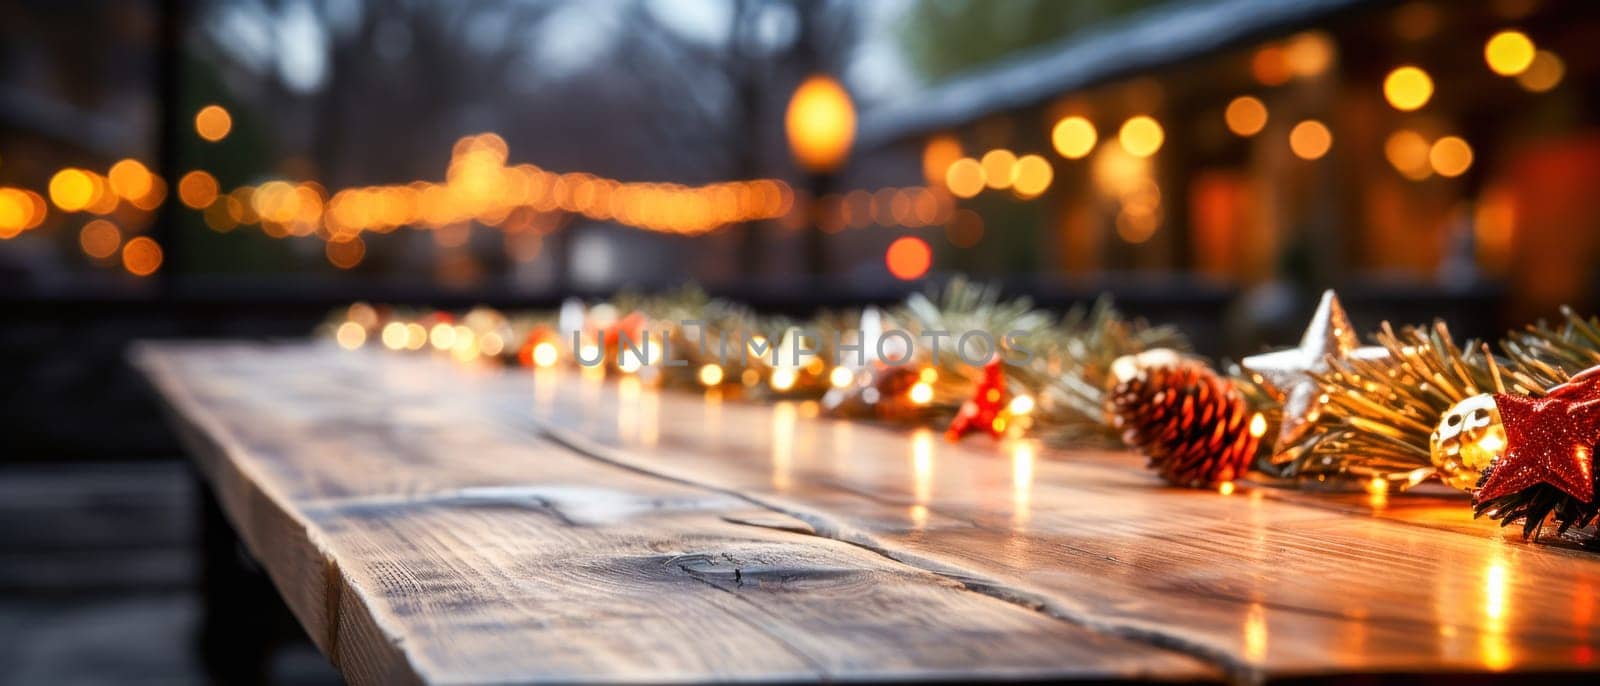 Holiday Lights on a Wooden Table: Magic in Every Detail by Yurich32